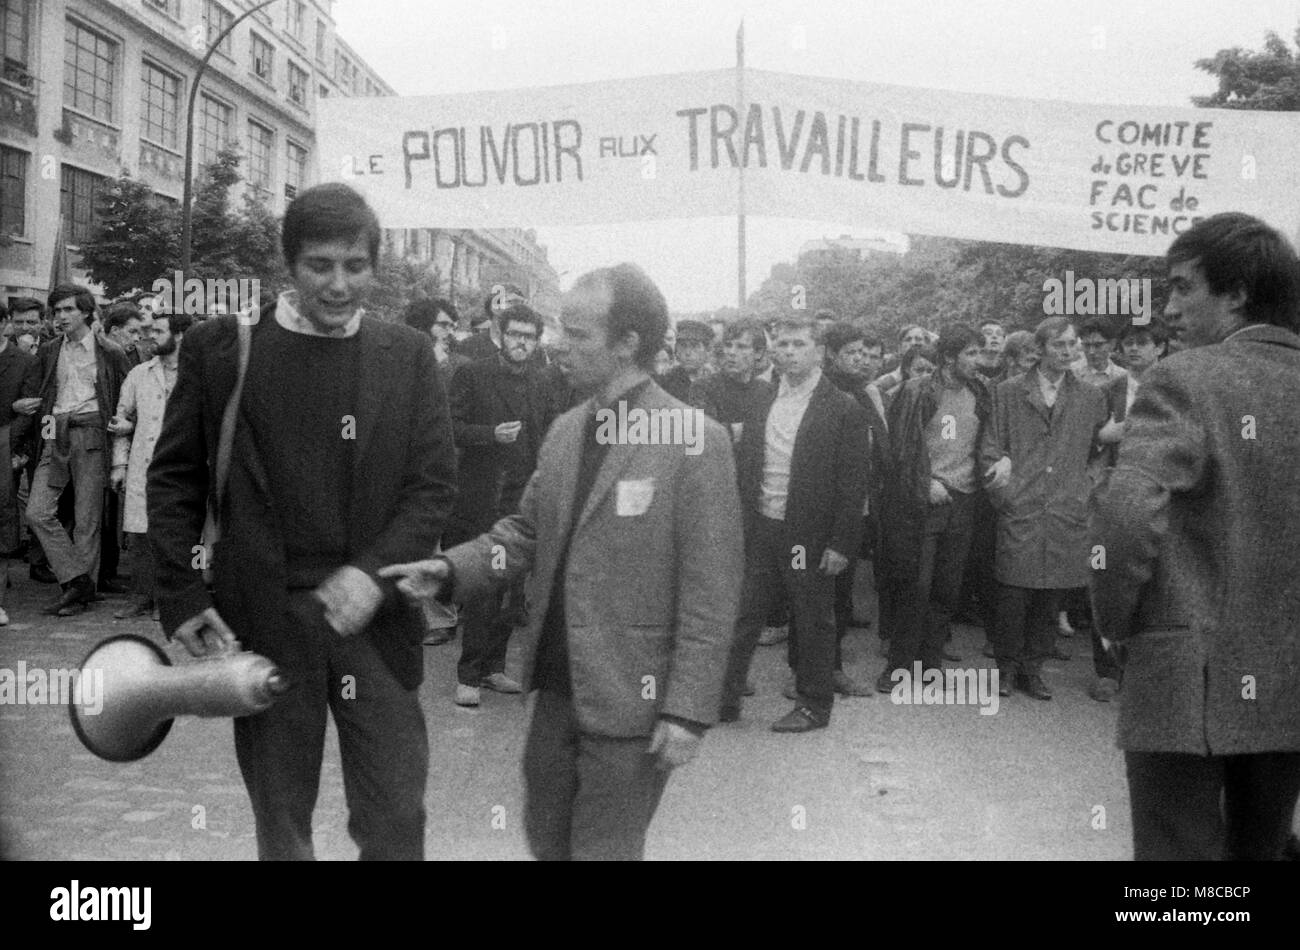 Philippe Gras / Le Pictorium -  May 68 -  1968  -  France / Ile-de-France (region) / Paris  -  Head of procession of a workers demonstration Stock Photo